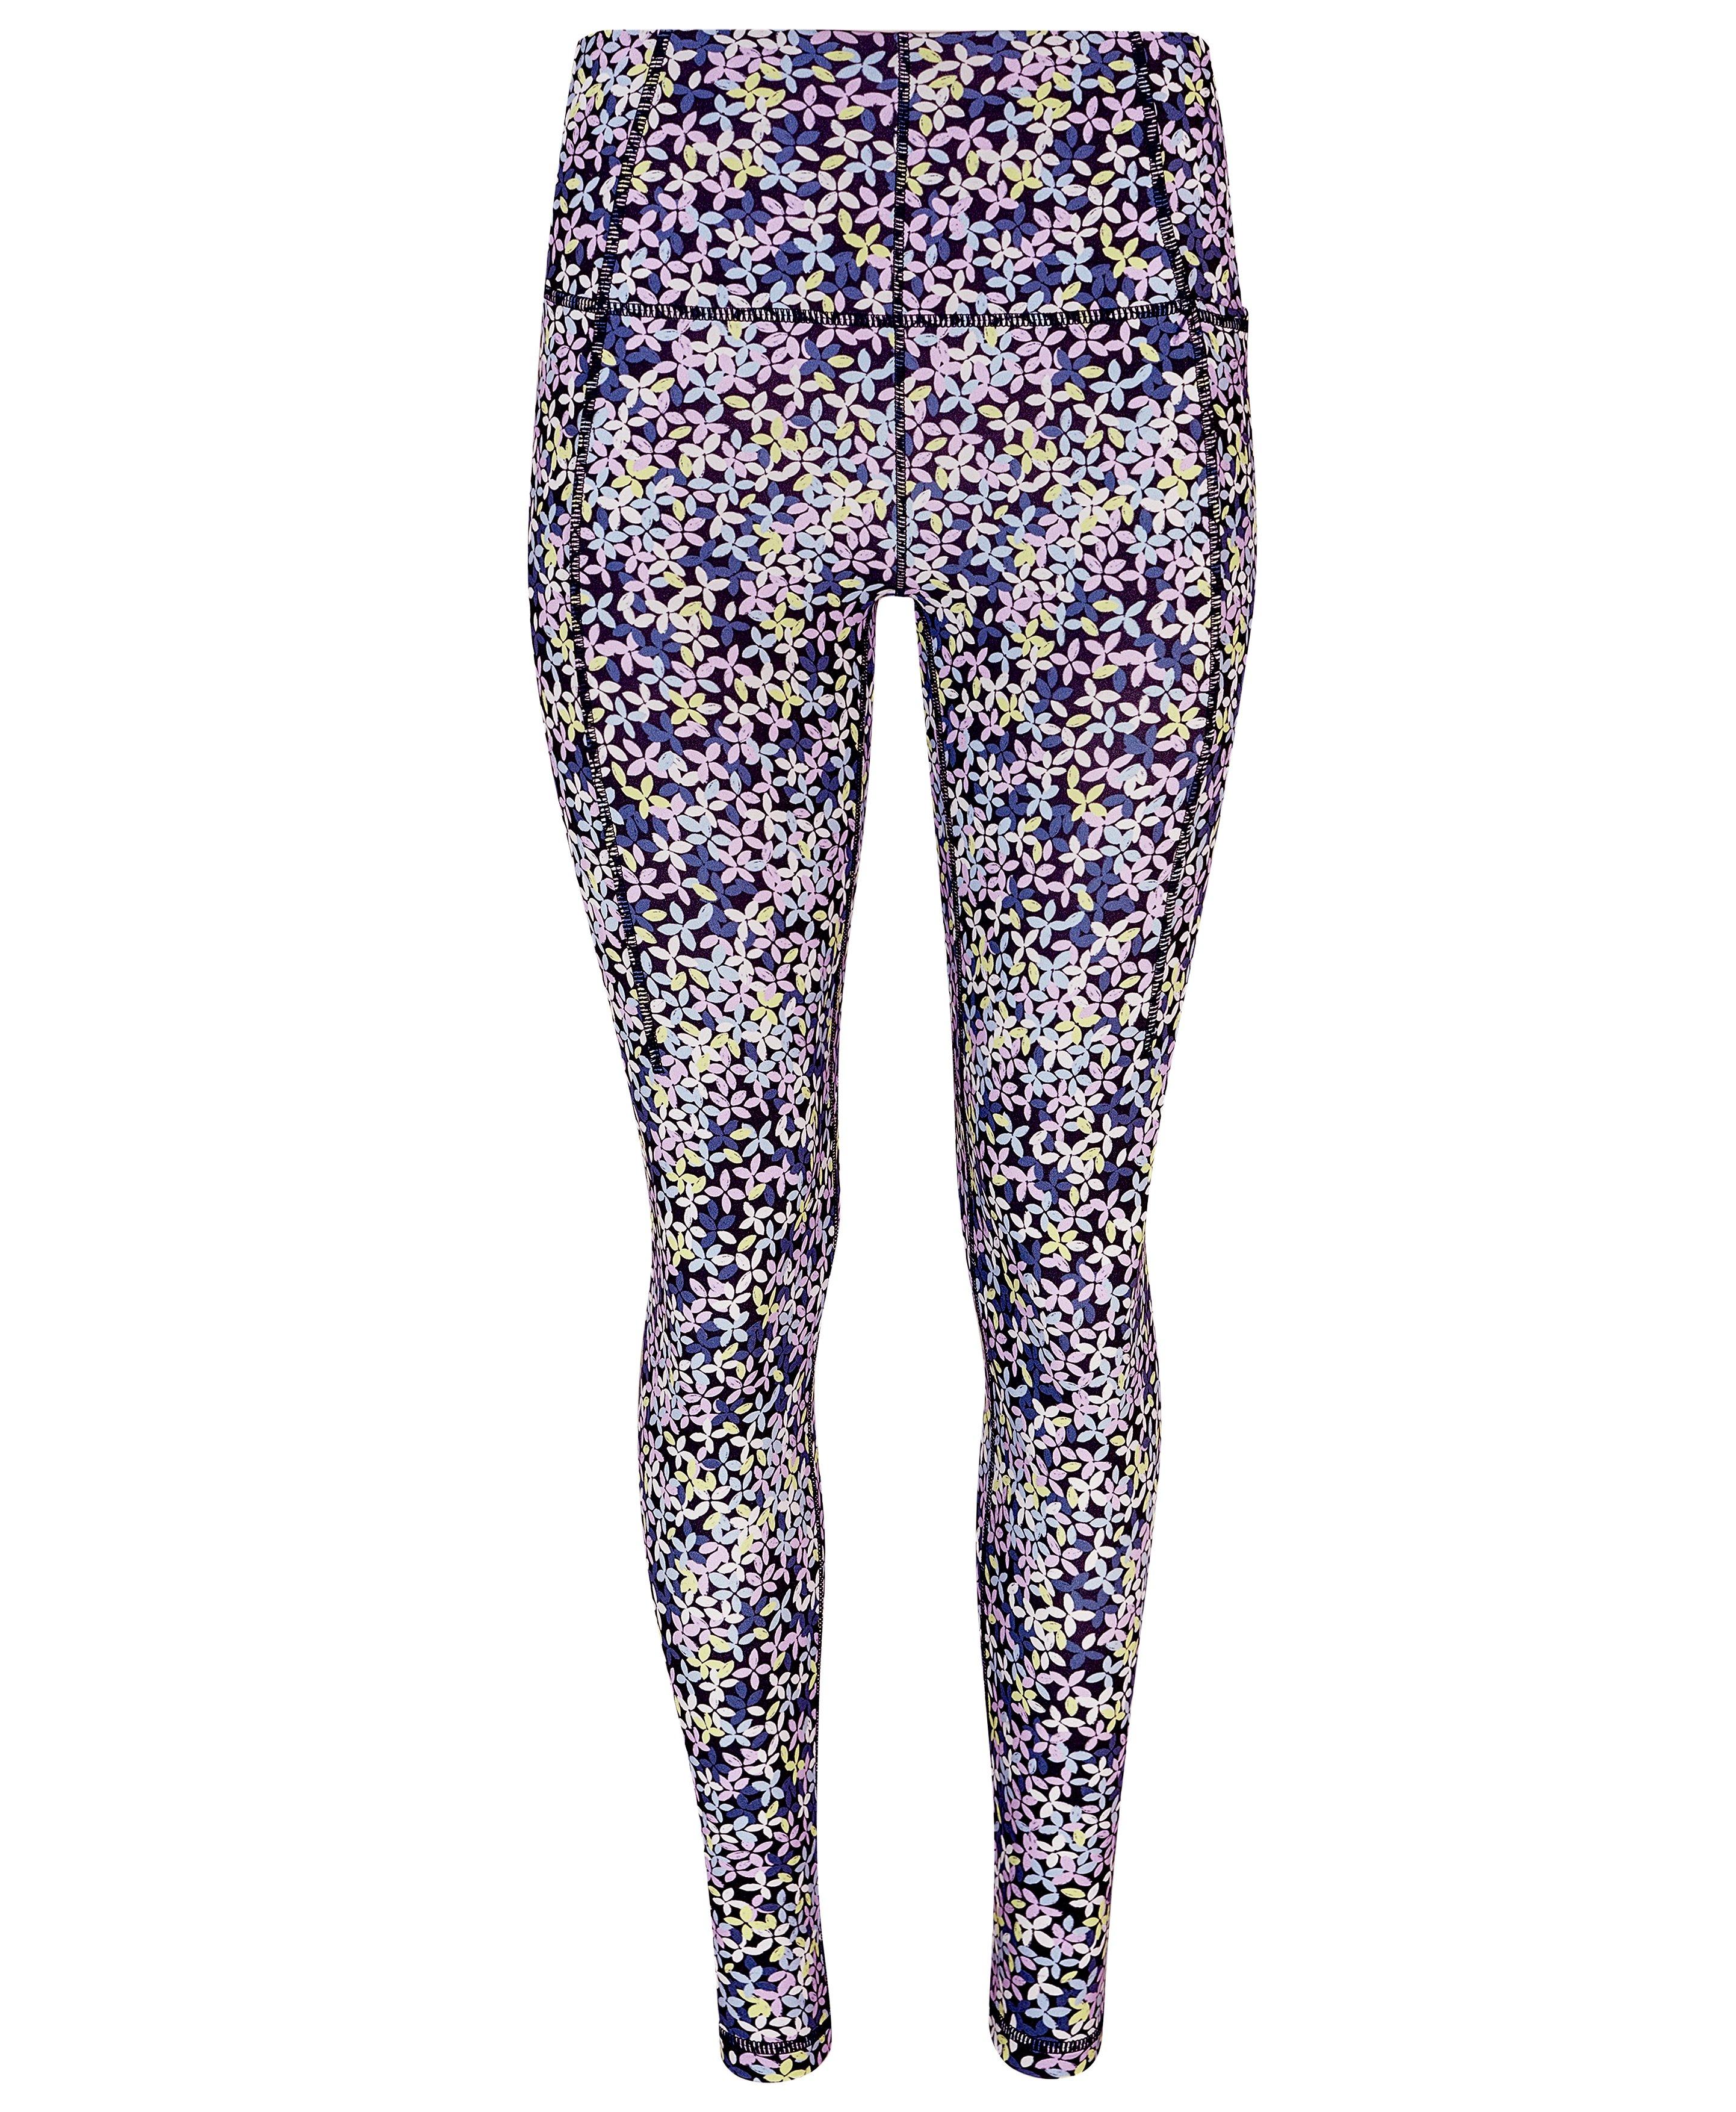 ✨AVAILABLE NOW✨ Purple Retro Floral Print Leggings 3 Pack GHs